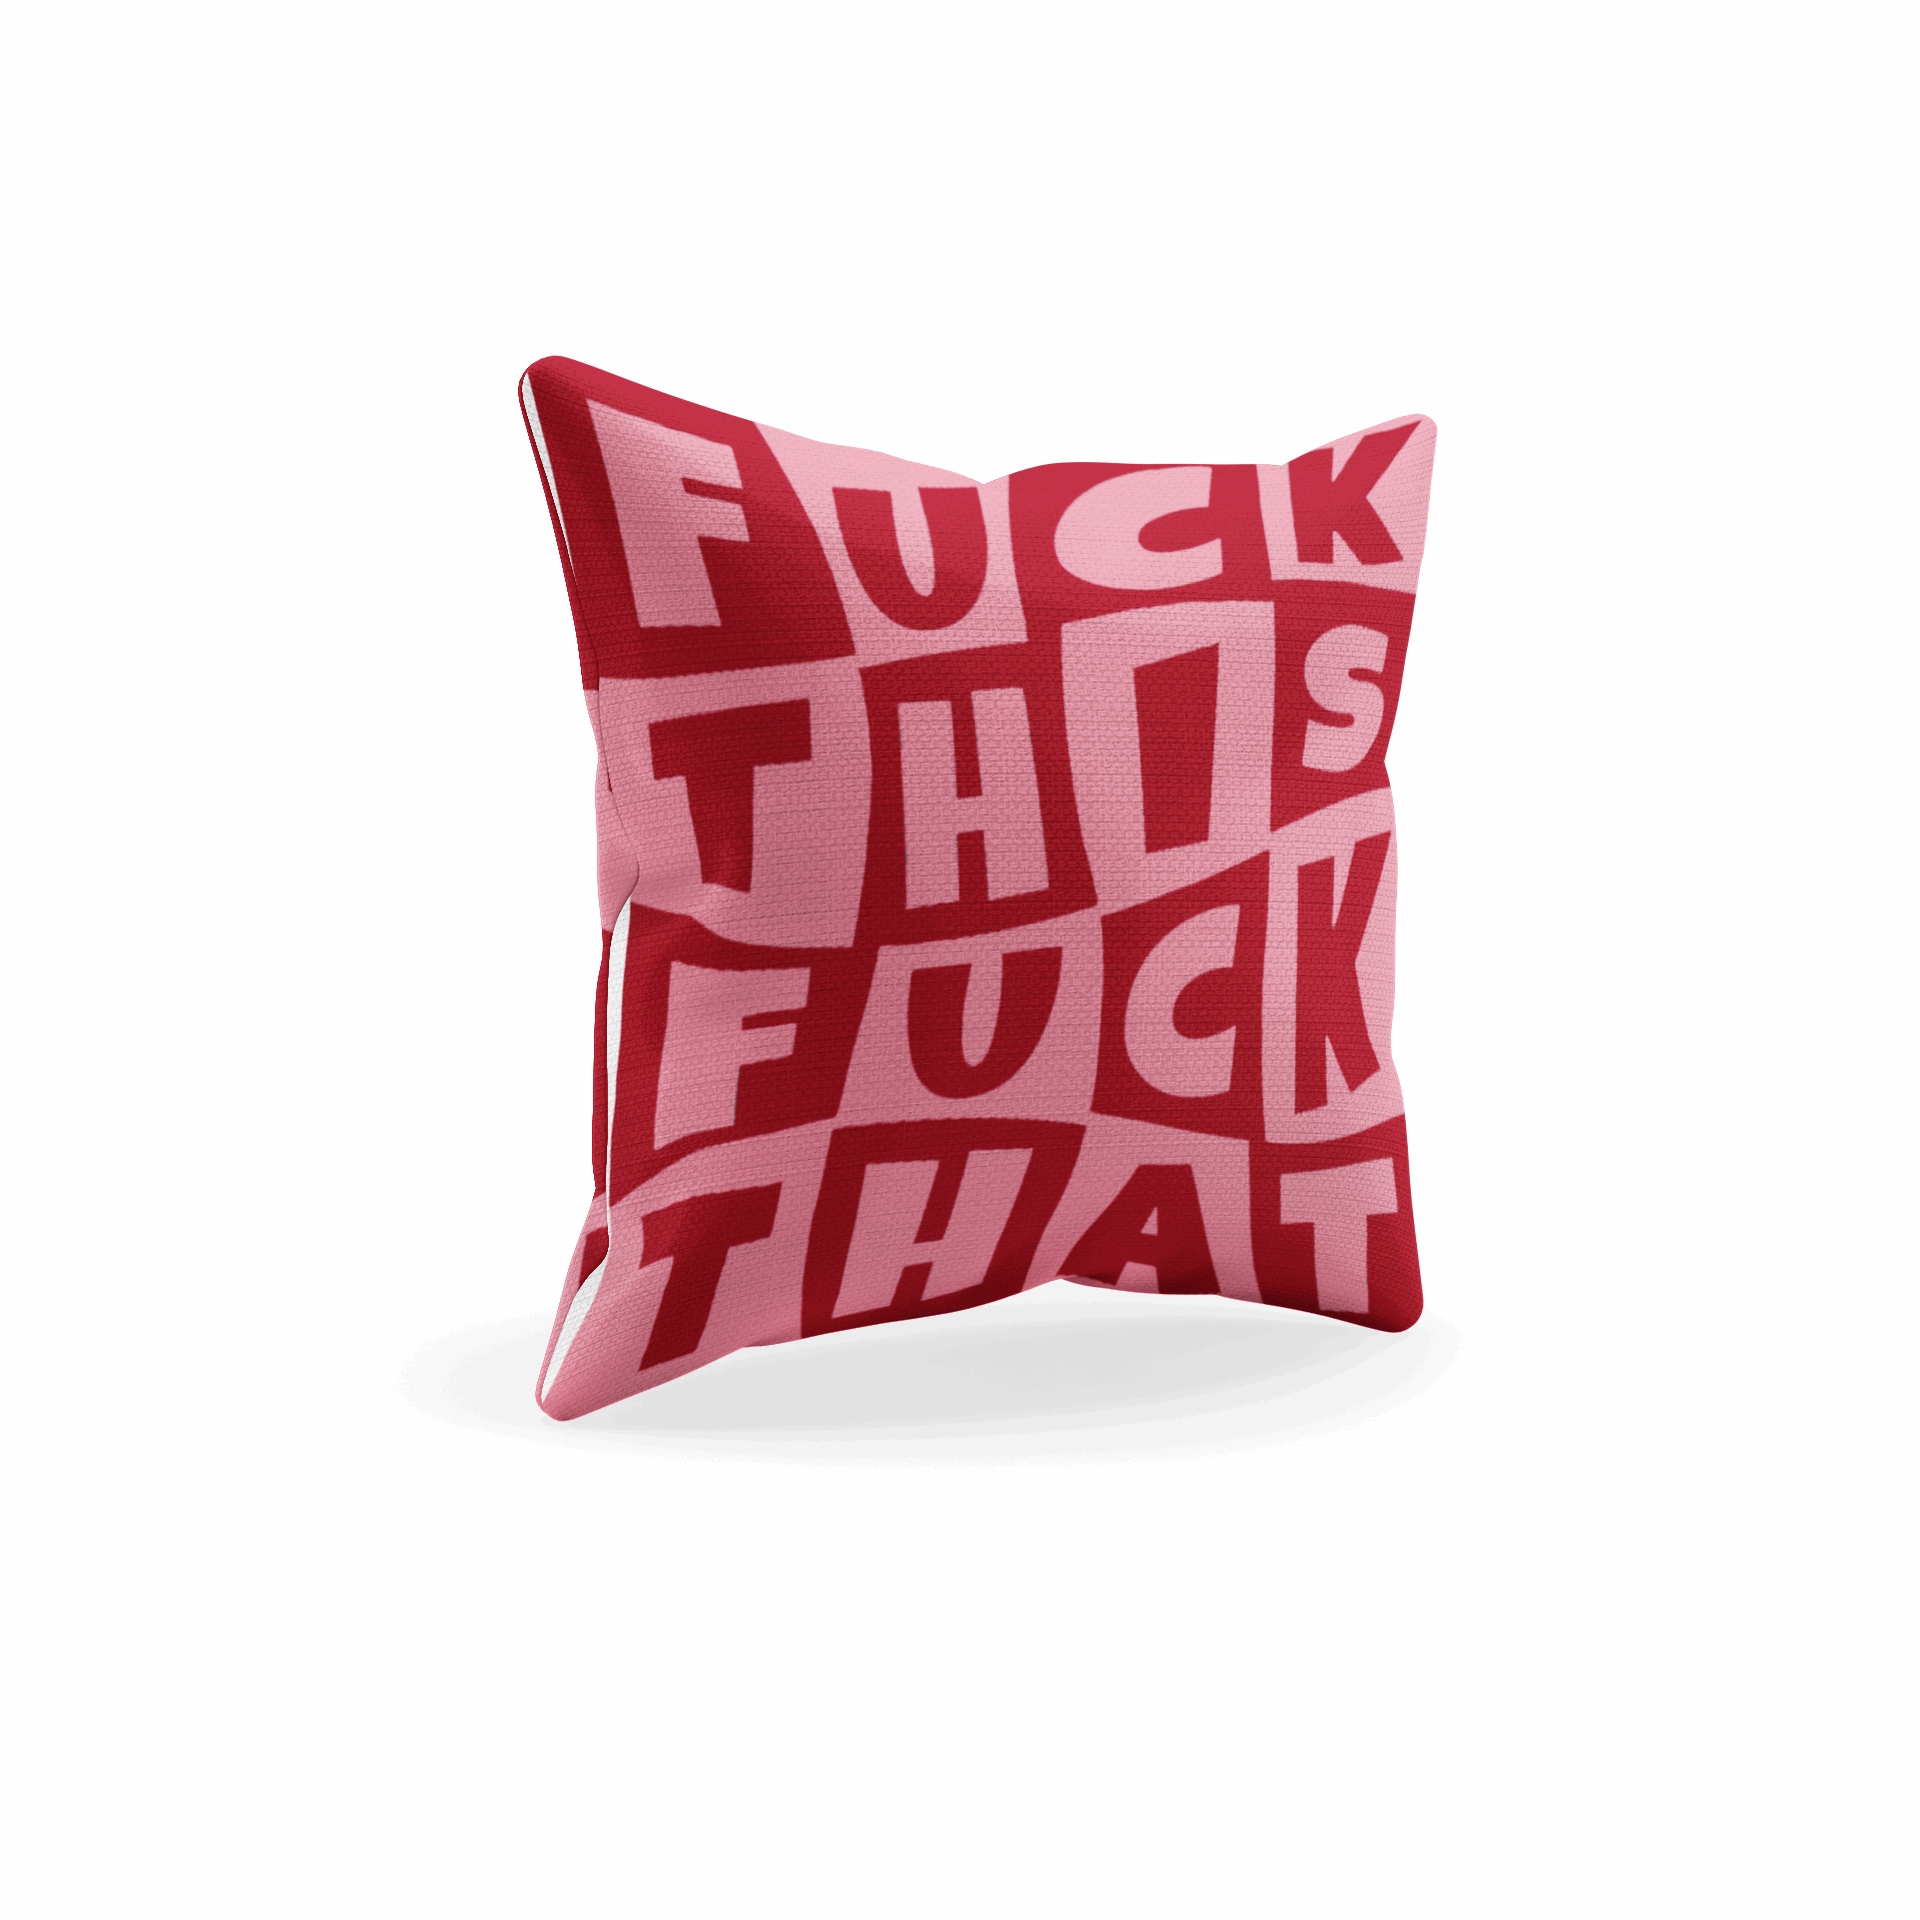 *SAMPLE* FUCK THIS FUCK THAT CUSHION COVER PINK & RED